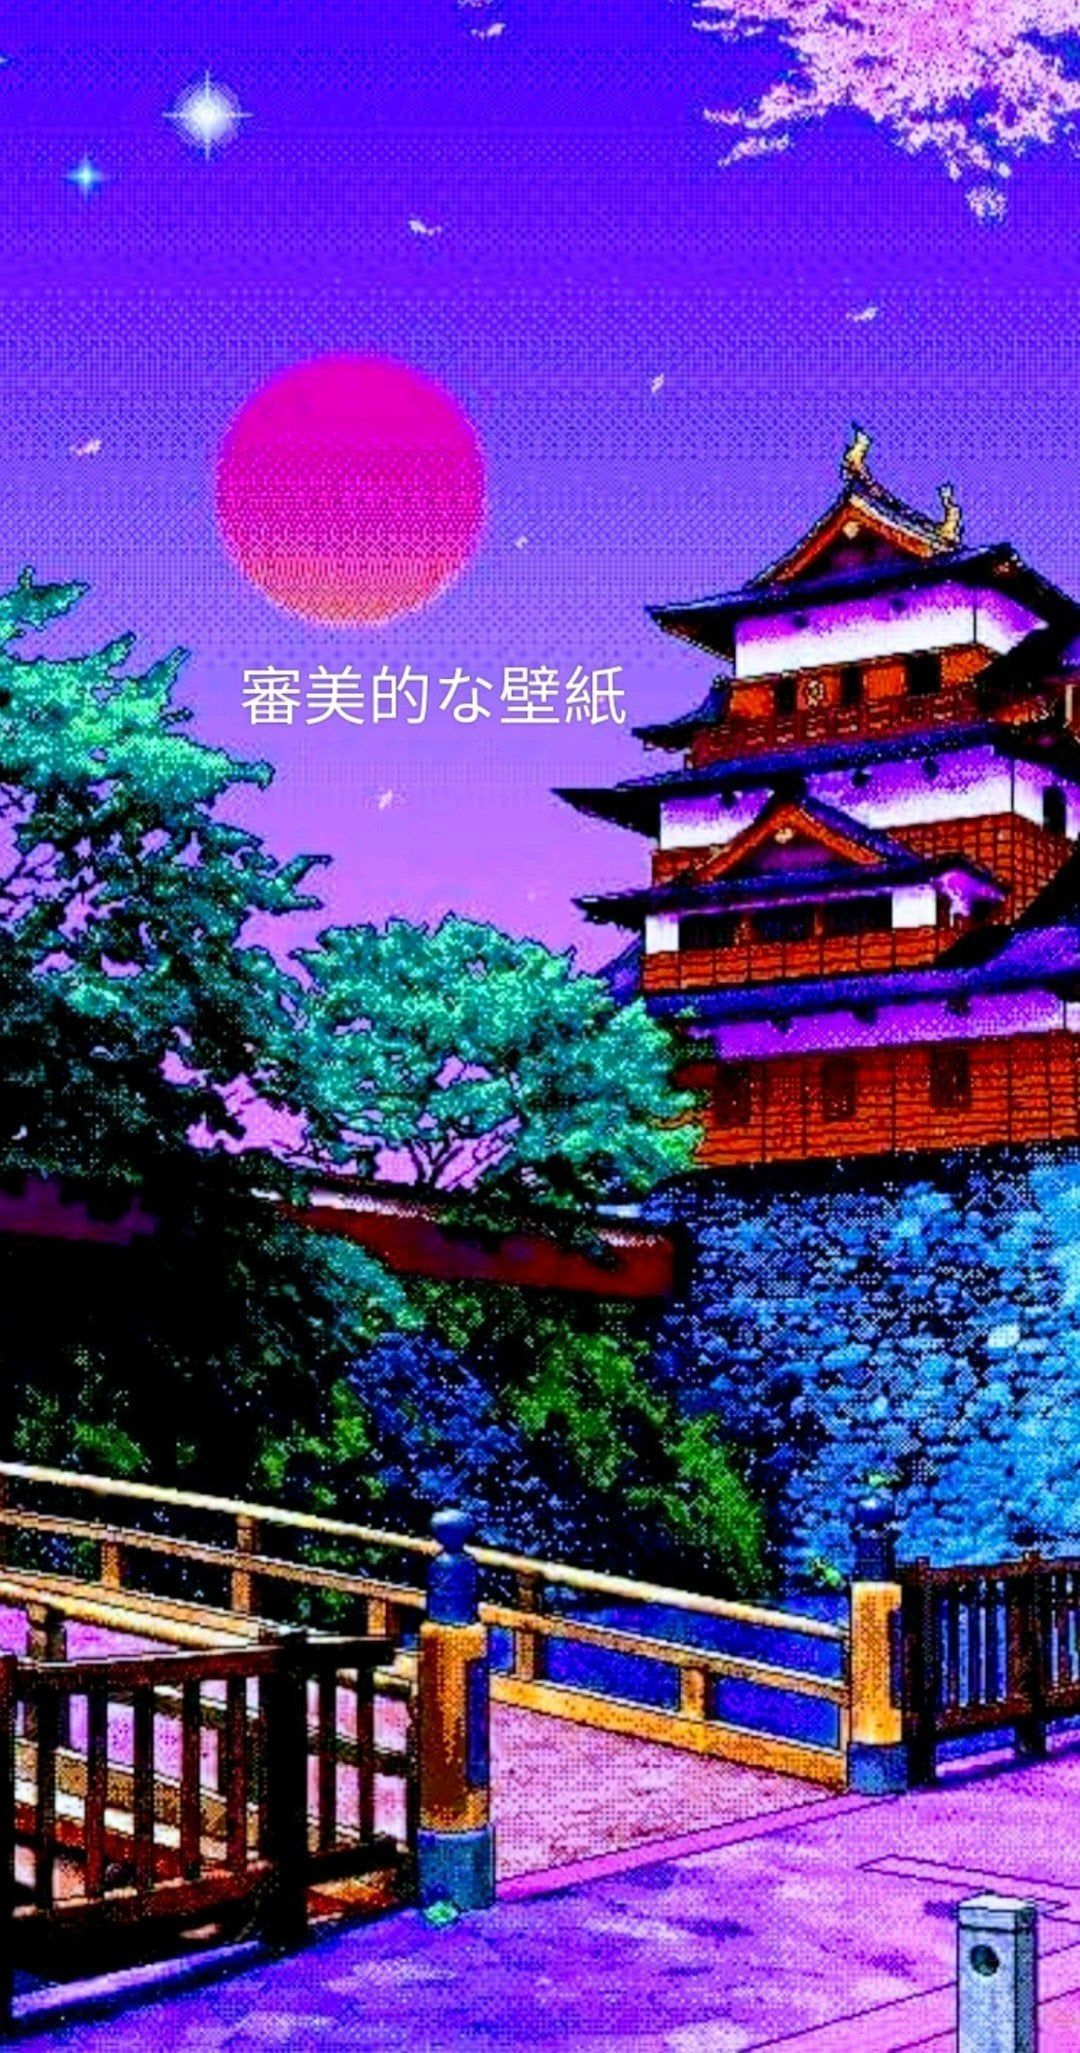 Chinese Aesthetic Wallpaper Free Chinese Aesthetic